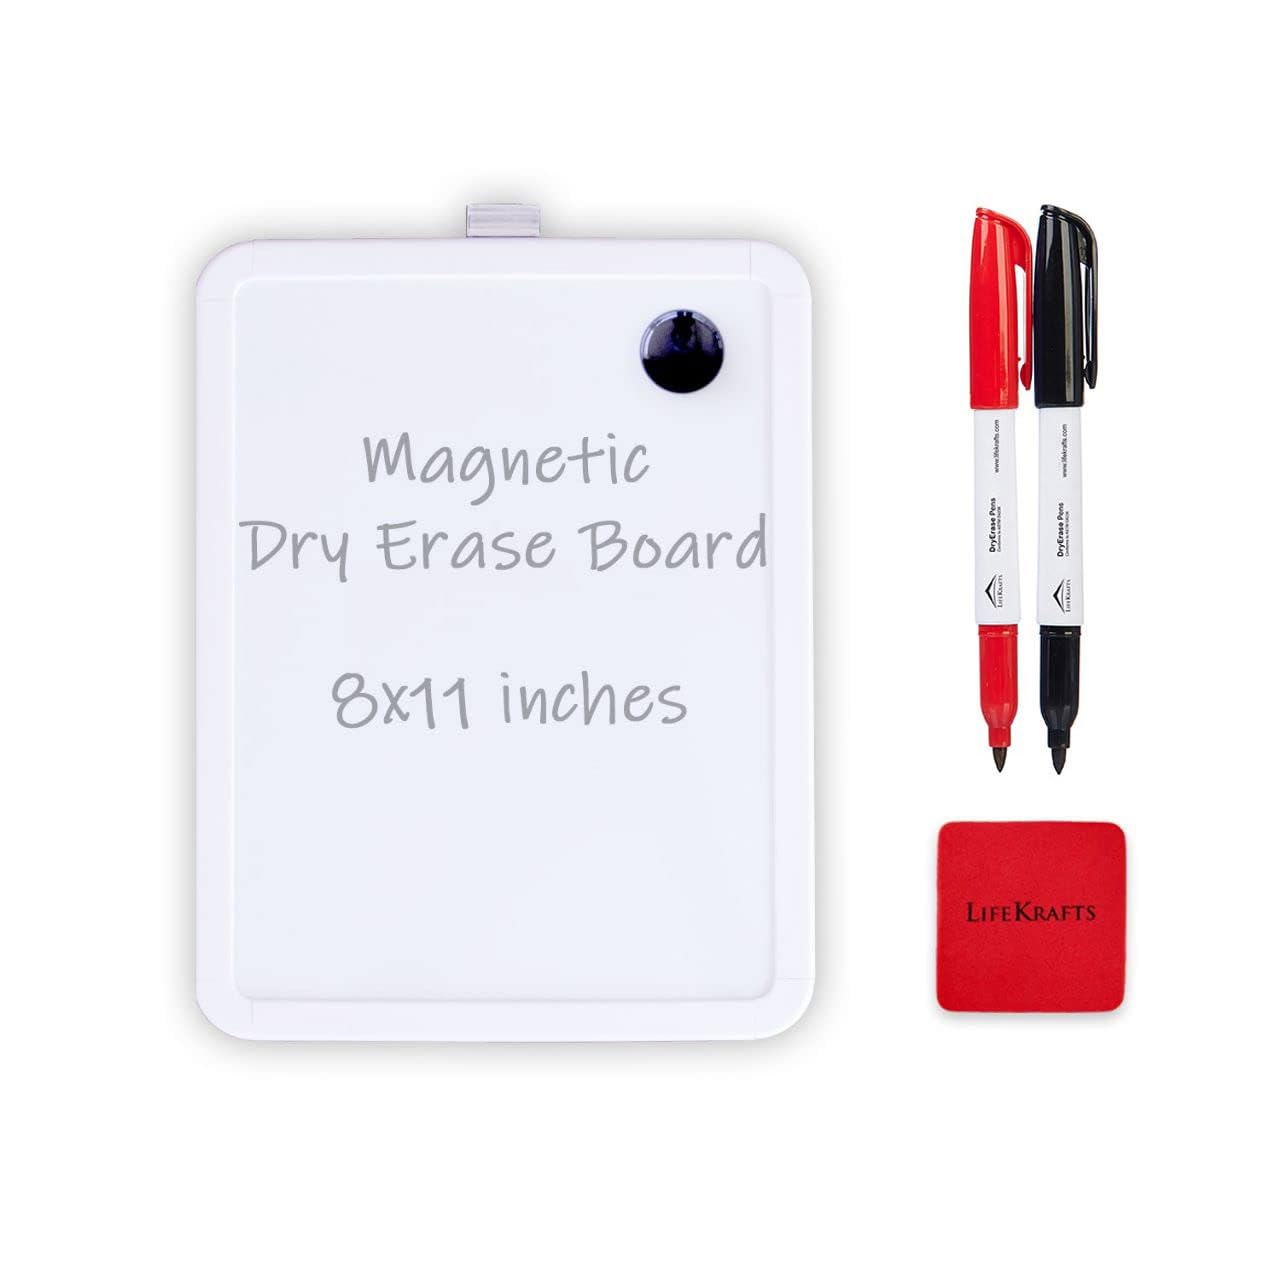 Dry Erase Mini White Board|Size:(8.5X11) Inches,Includes 2 Marker Pens &1 Eraser,Pack Of 1|Single Sided Magnetic White Board For Kids And Adults,Great For Schools,Home,Office,Planning Etc.